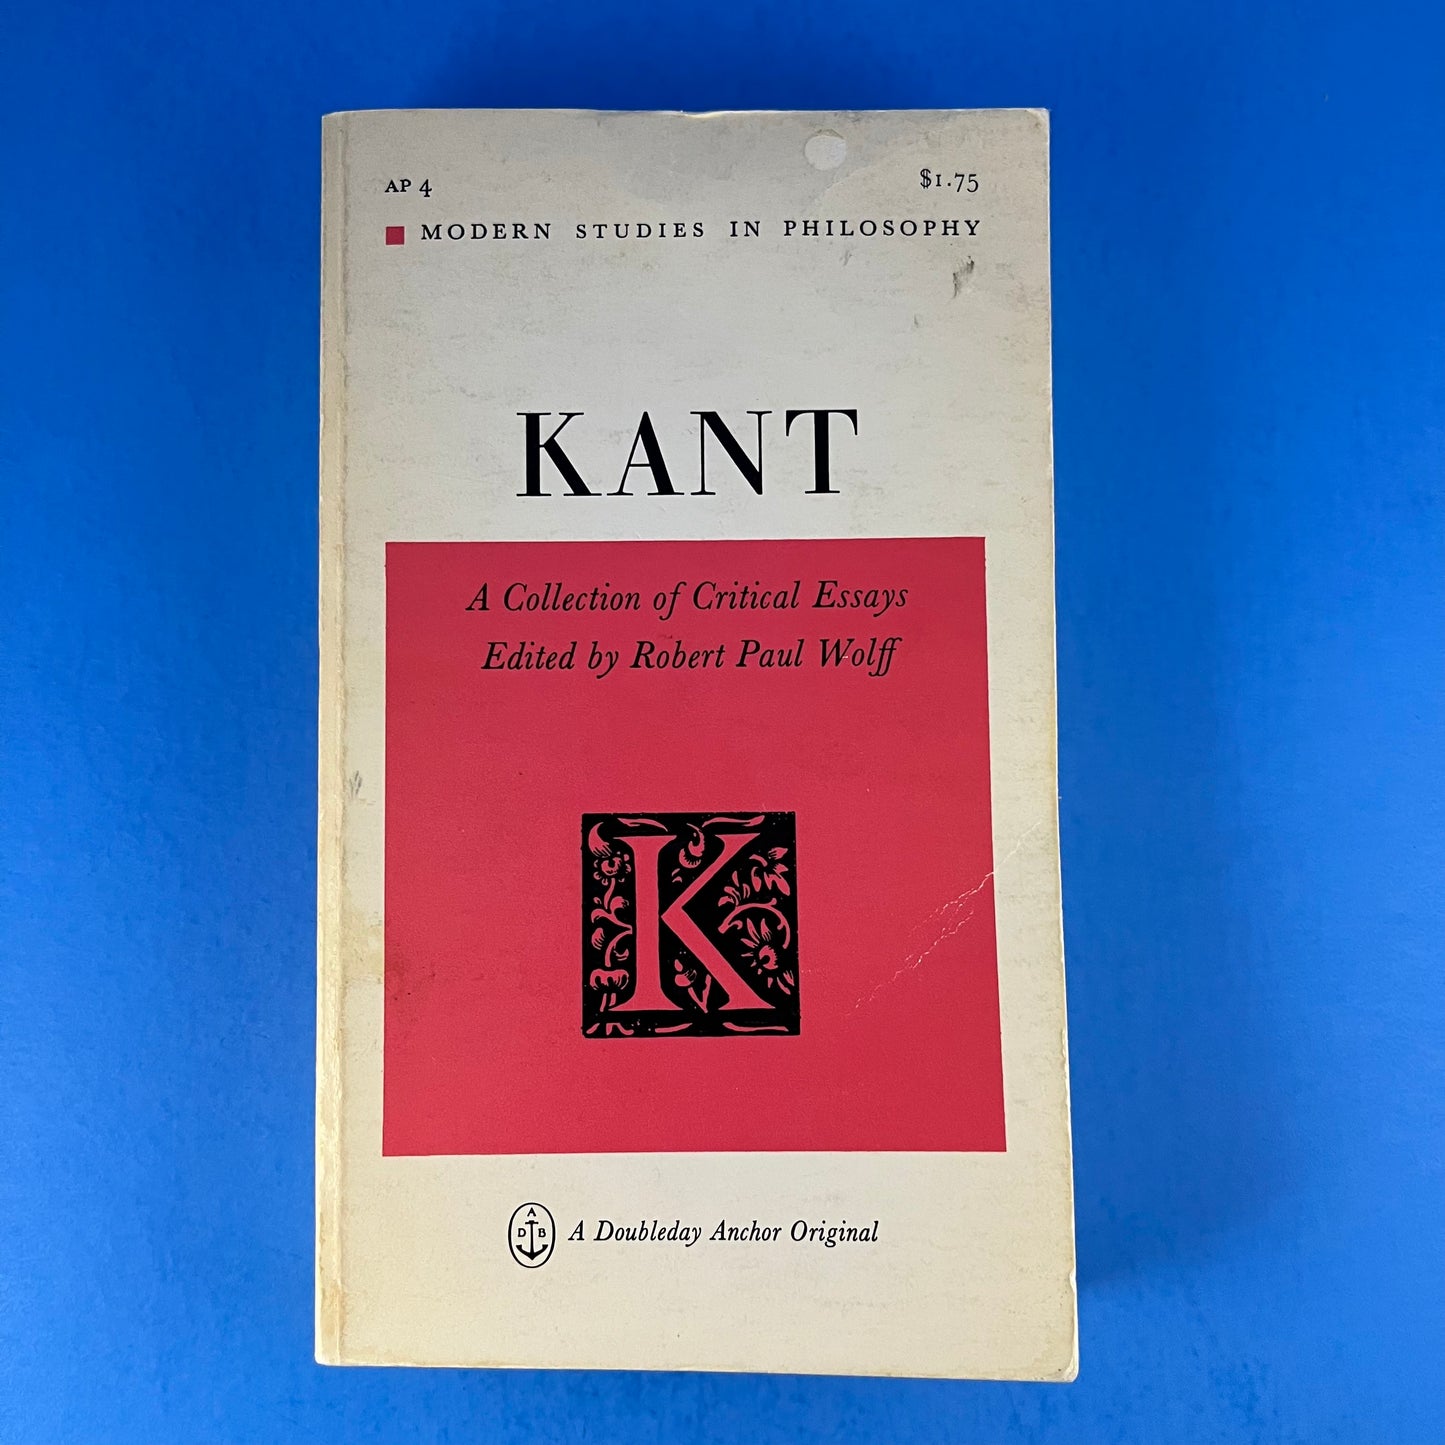 Kant: A Collection of Critical Essays